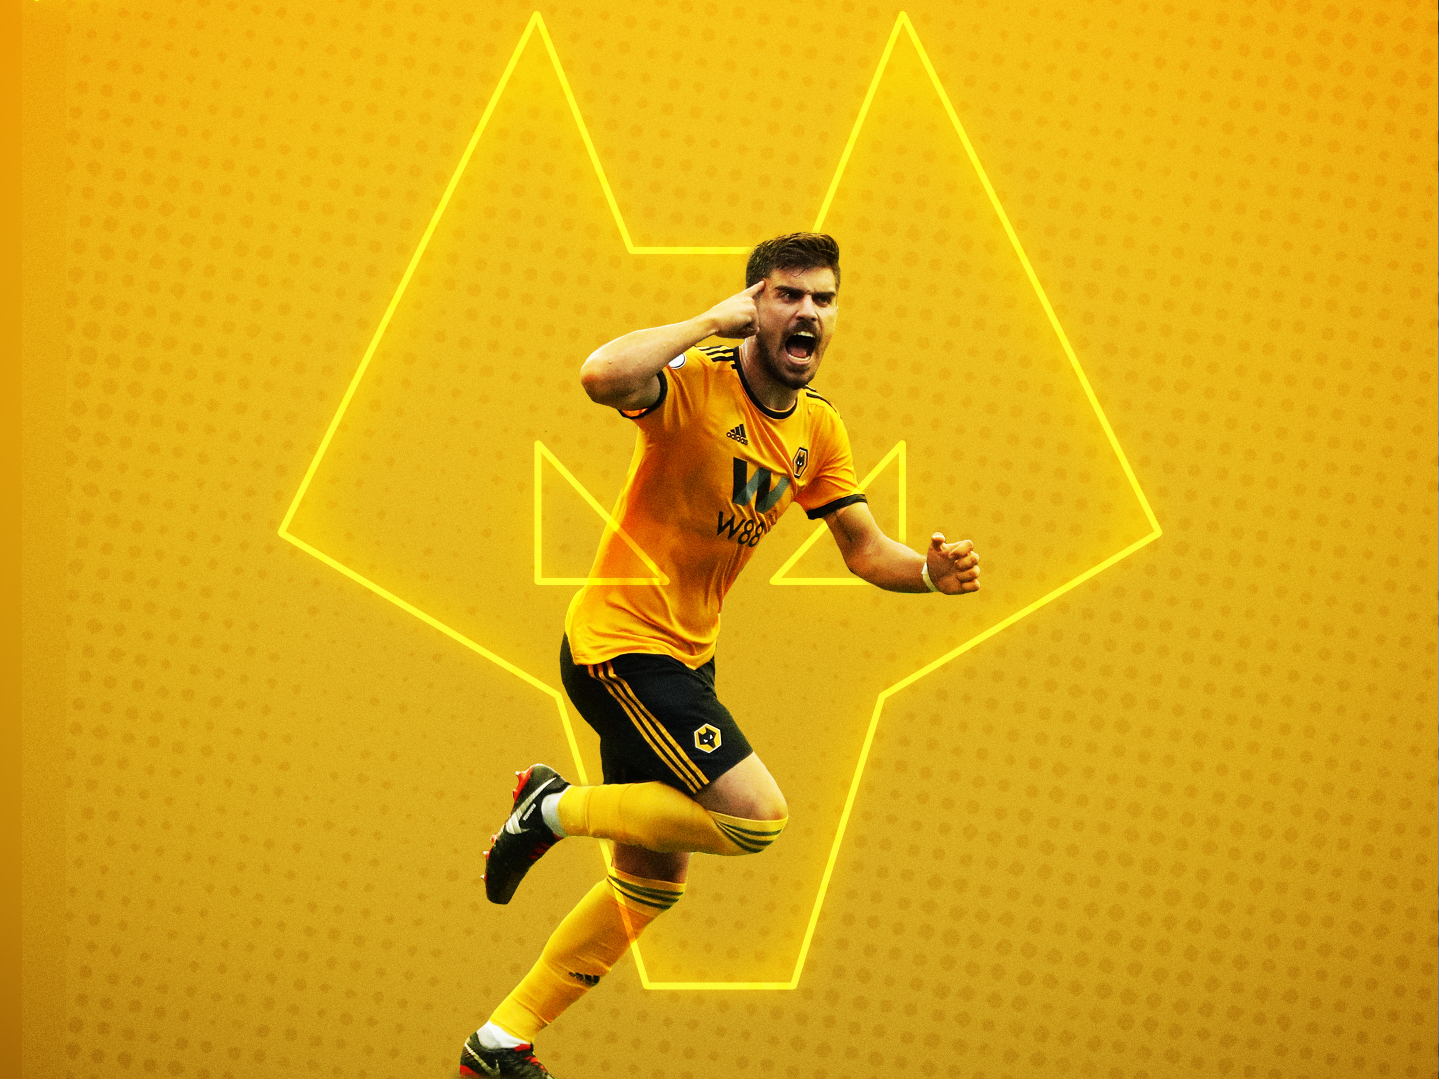 Download wallpapers Ruben Neves abstract art Portuguese footballer  Wolverhampton Wanderers FC soccer Neves Premier League neon lights for  desktop with resolution 2880x1800 High Quality HD pictures wallpapers